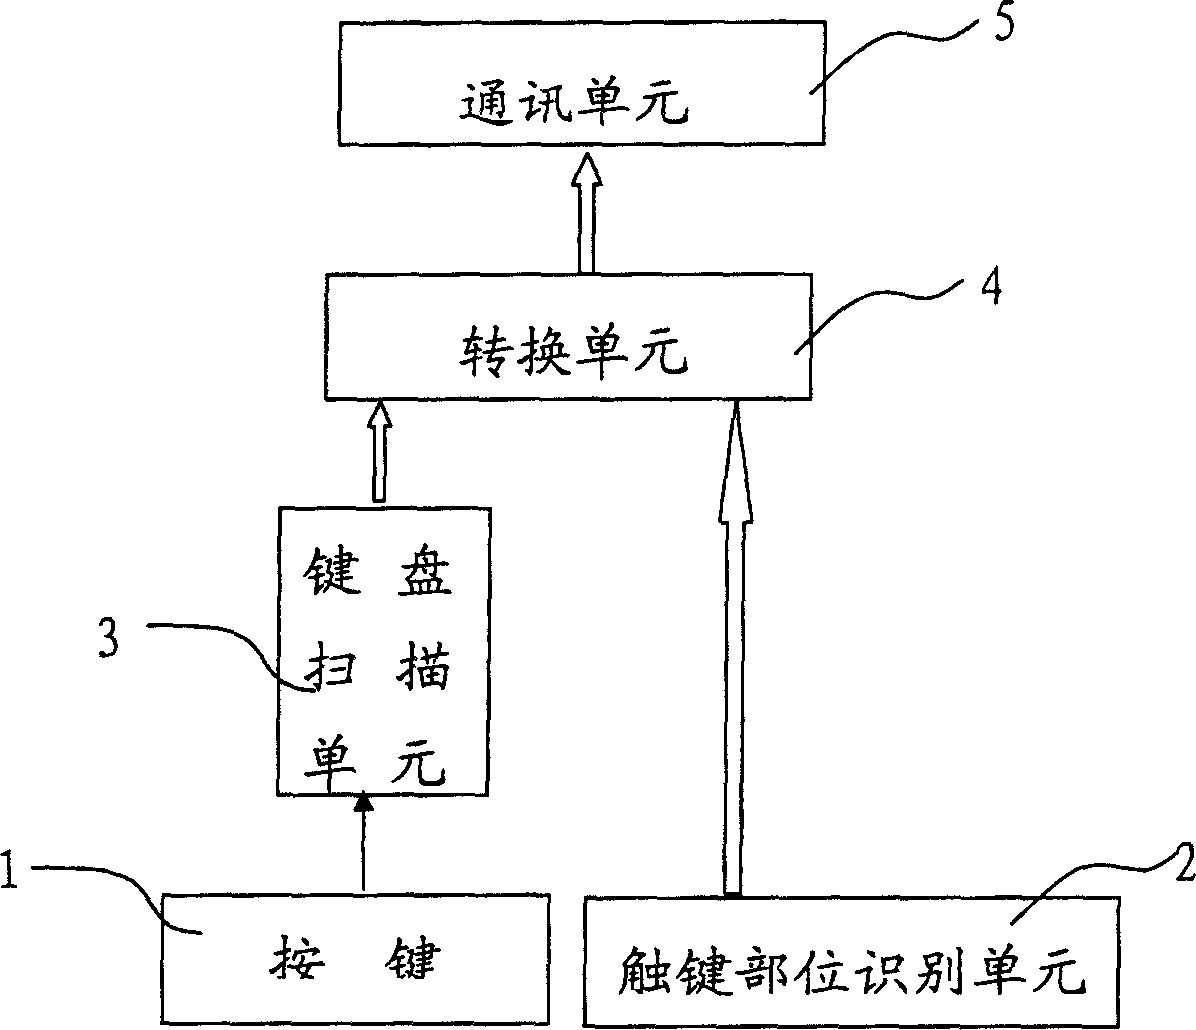 Portable keyboard and fingerprint feature information extracting method thereof